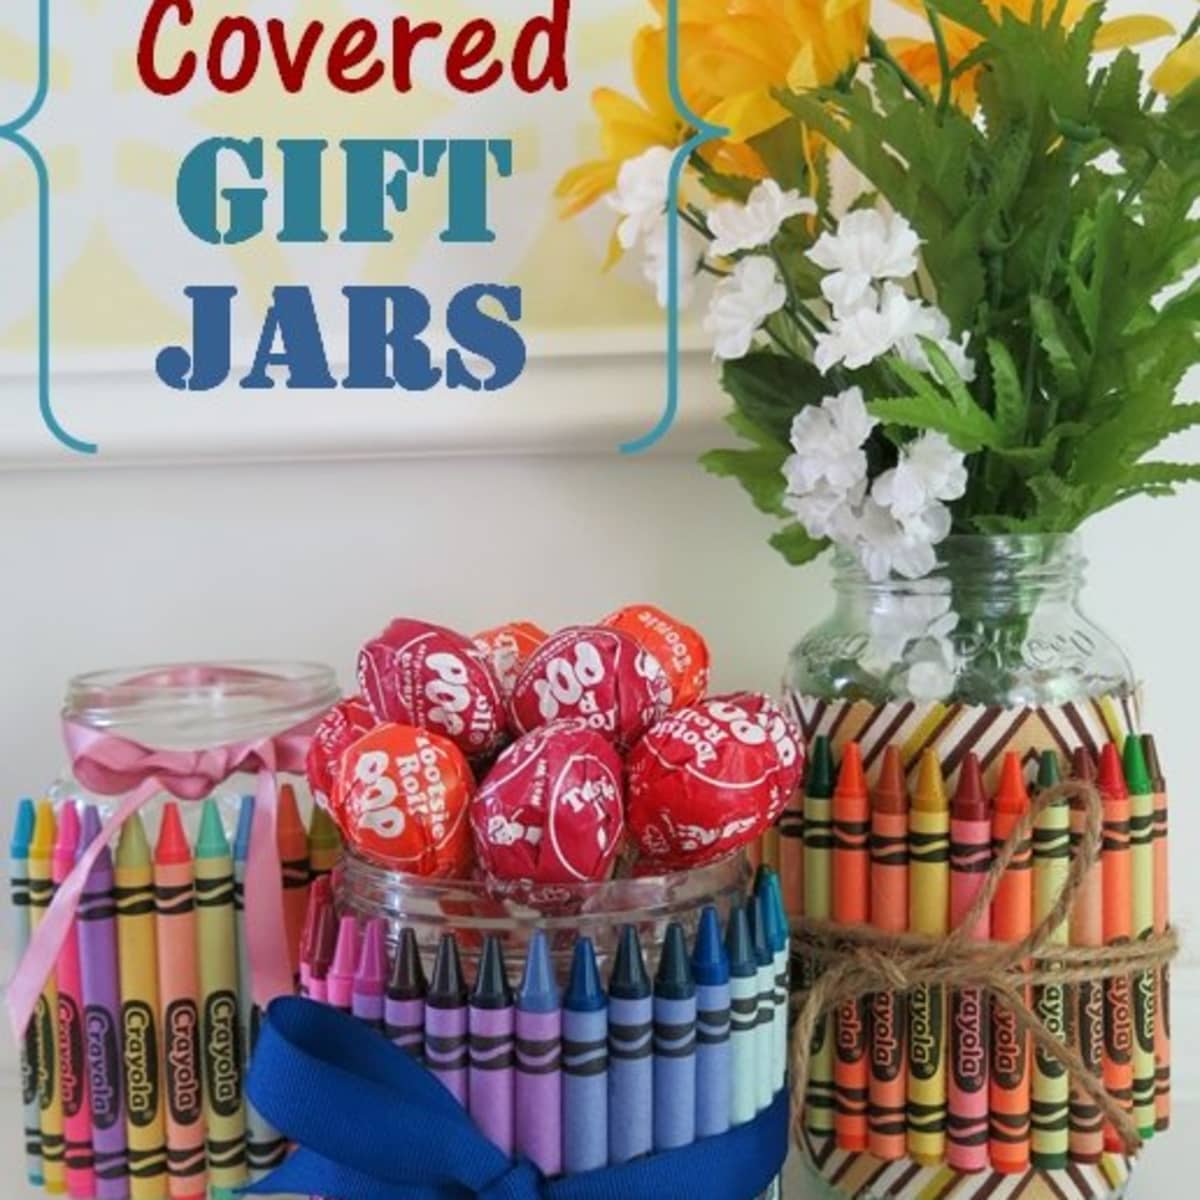 M and M Birthday Party Ideas and Supplies for a themed Party - HubPages